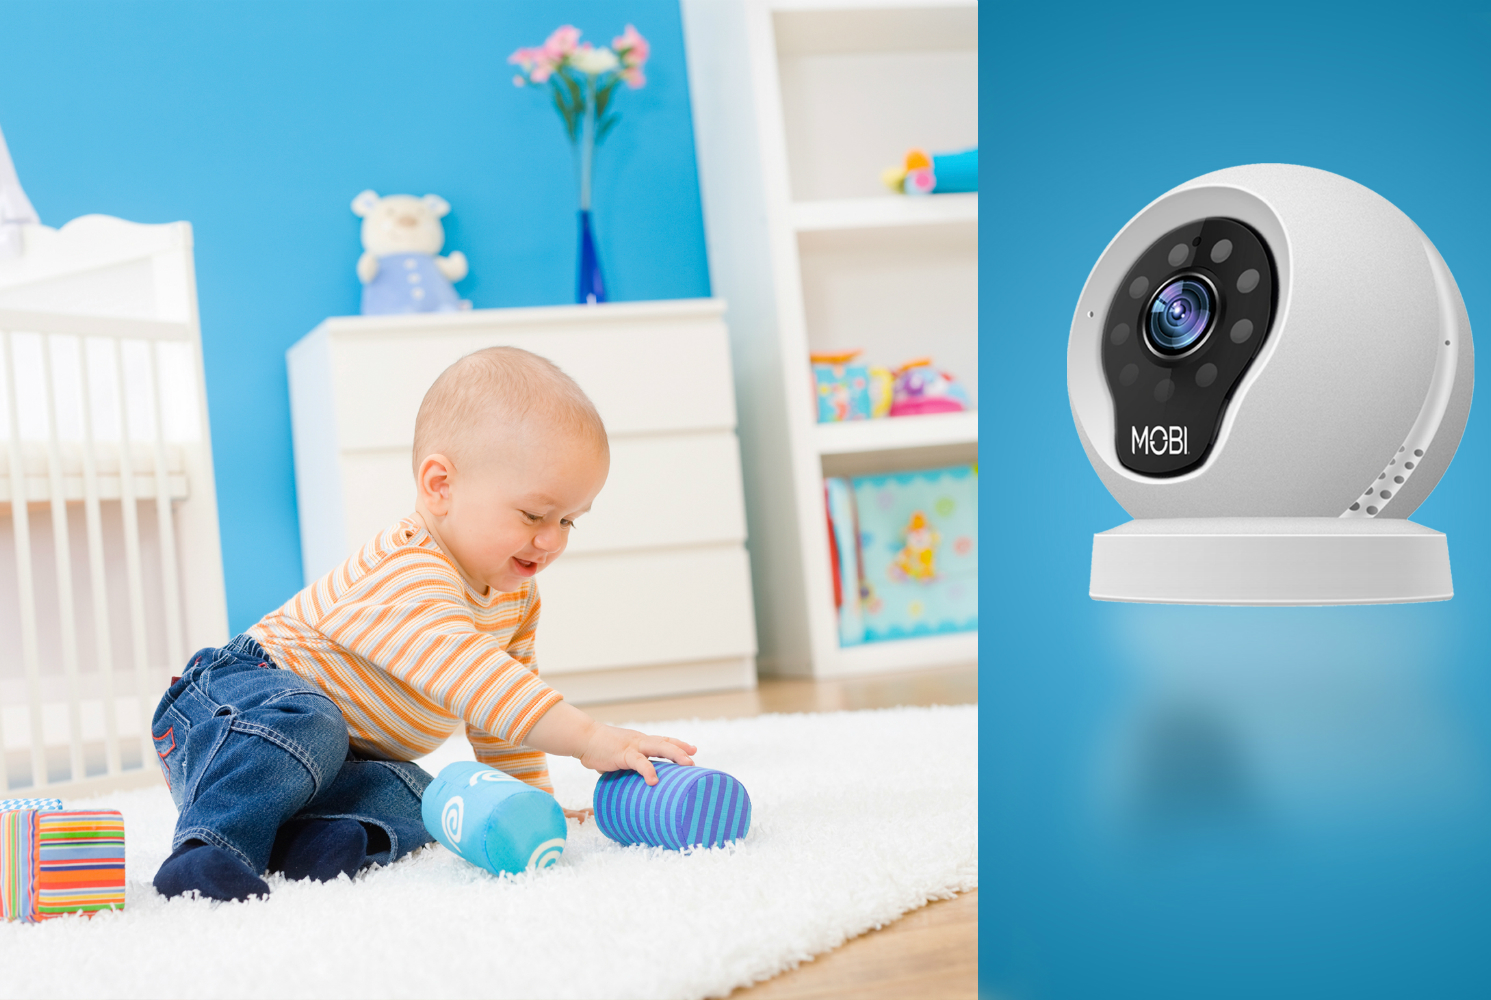 walmart offers sweet deals on owlet smart sock 2 baby monitor mobicam multi purpose wi fi video monitoring system 4